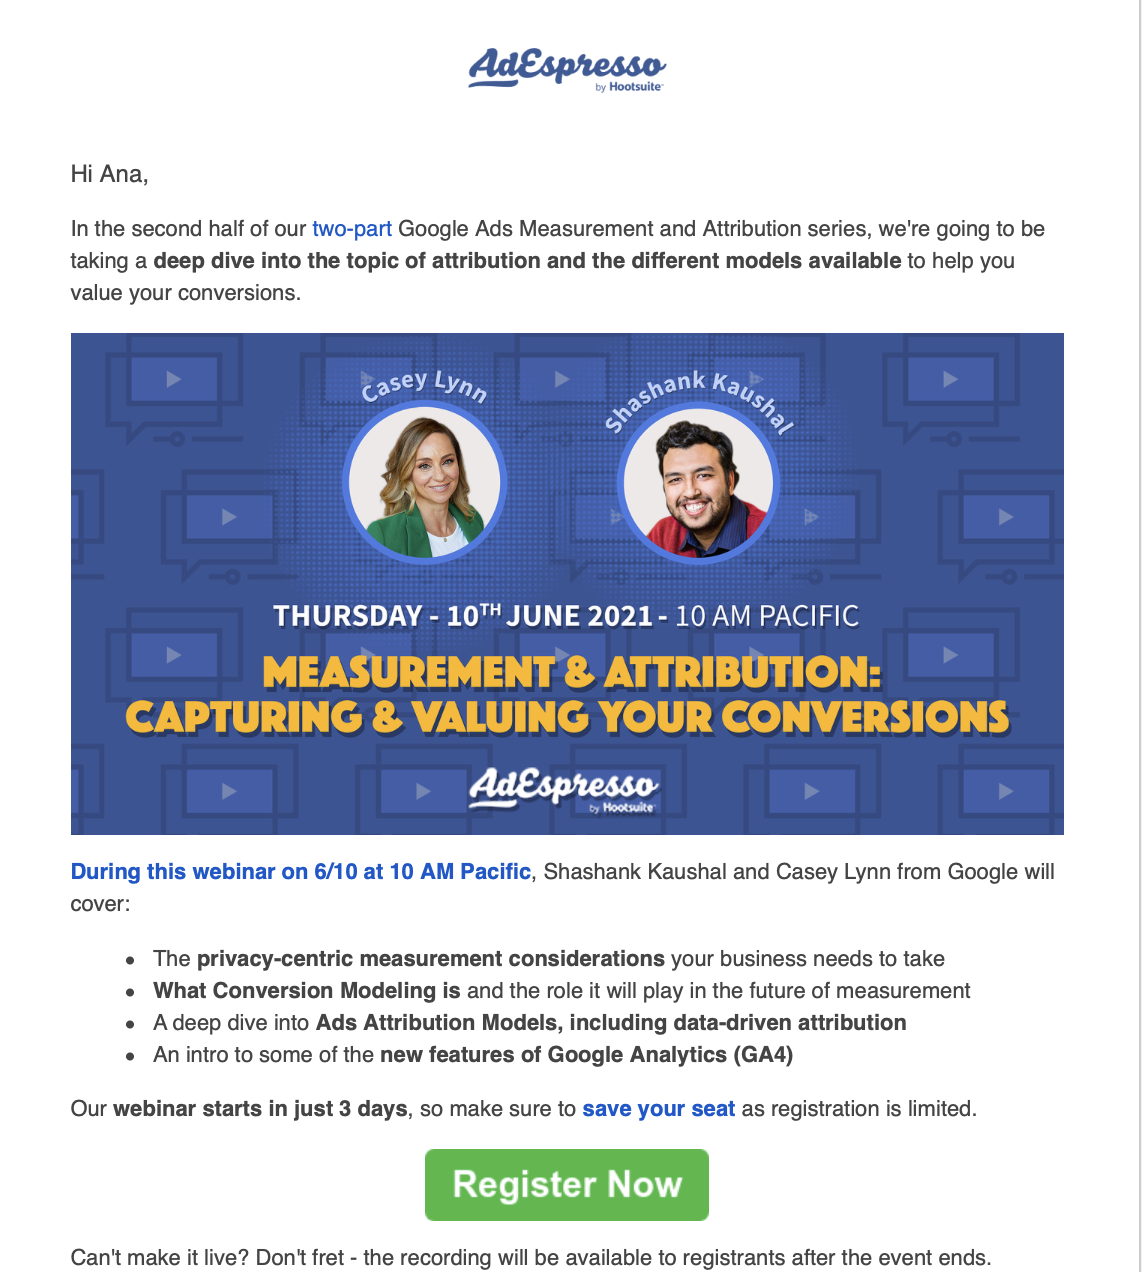 Screenshot from AdEspresso's content promotion email